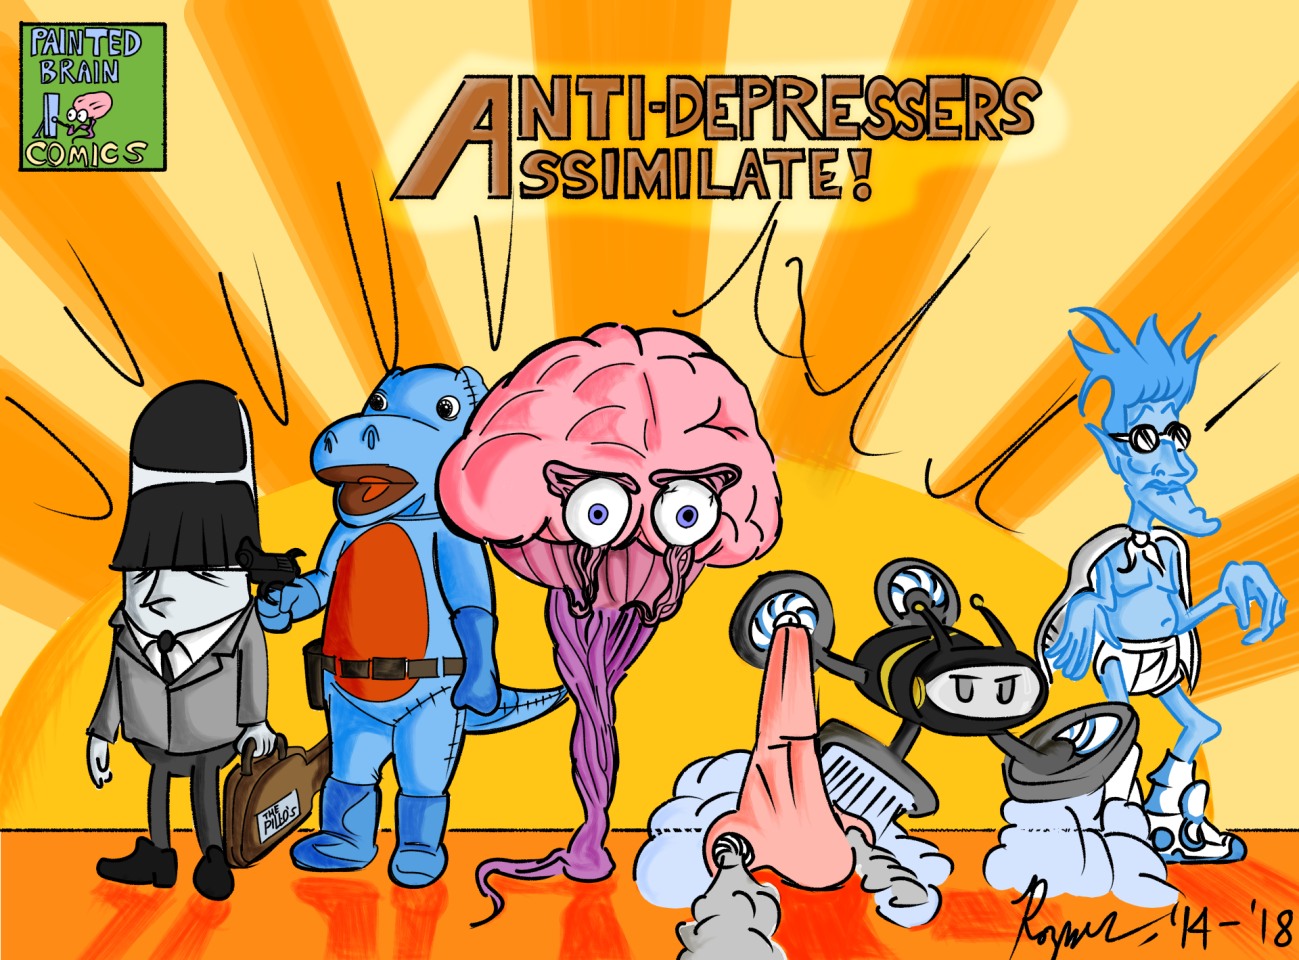 Illustration by Lawrence Rozner shows comic book characters called the Anti-Depressers